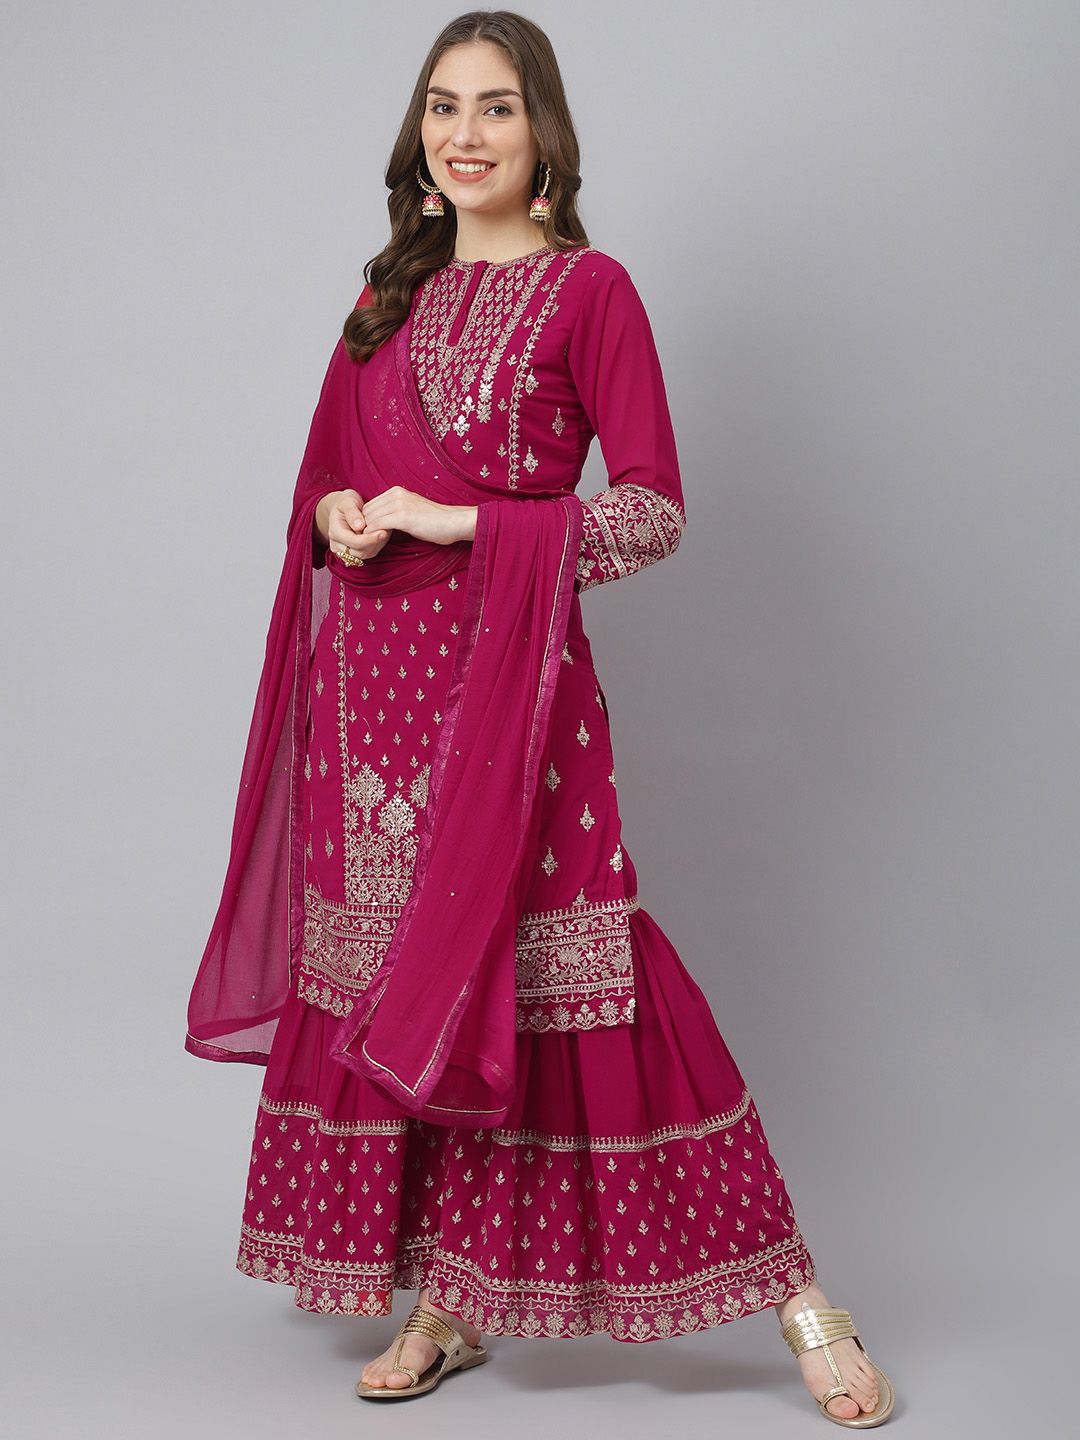 Readiprint Fashions Women Red & Rose Gold Embroidered Unstitched Dress Material Price in India